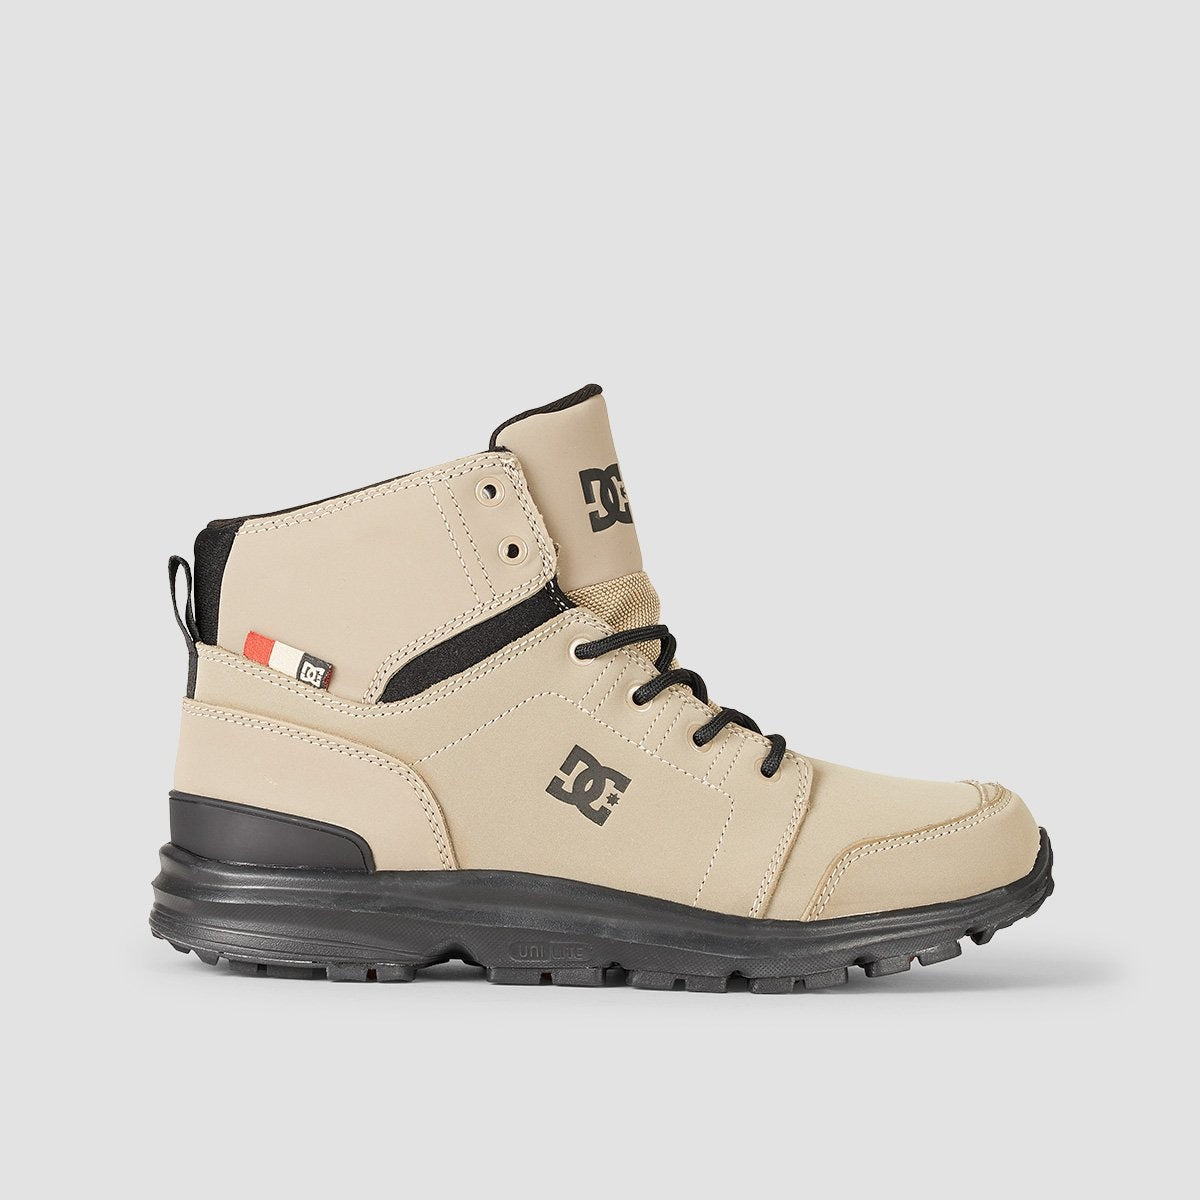 DC Torstein Boot Timber - rollersnakes 